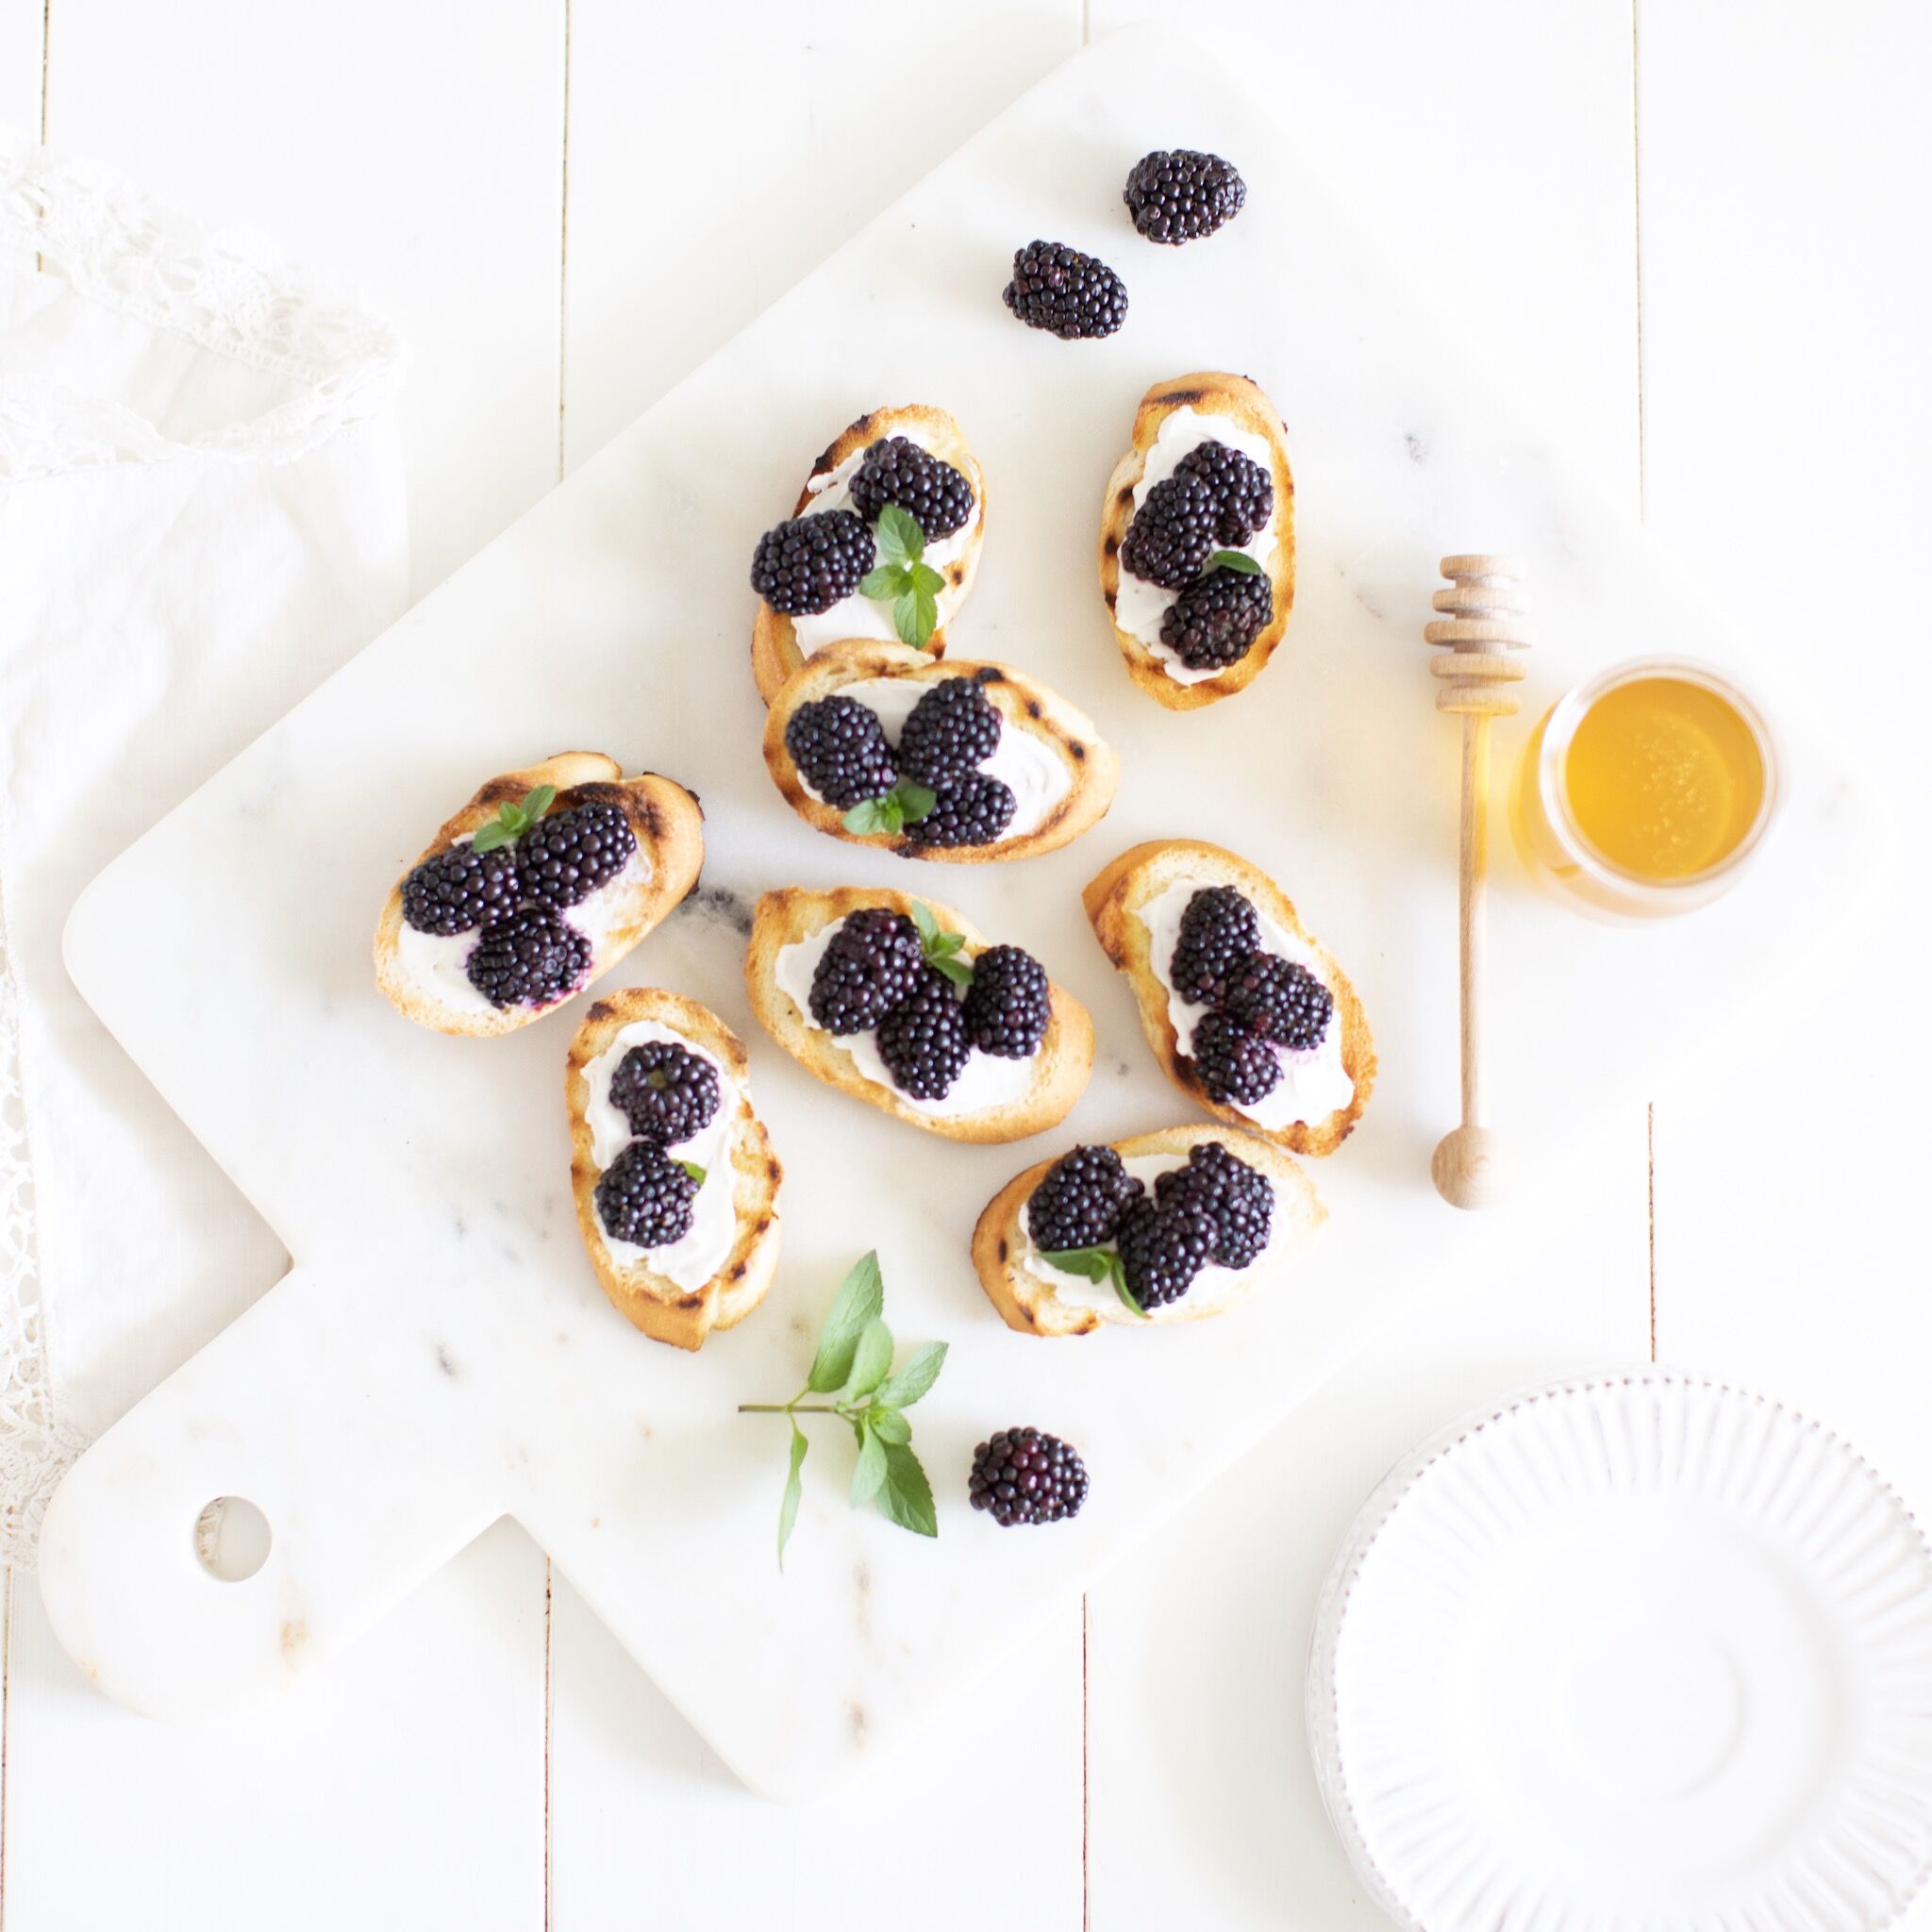 Blackberry Crostini with a vegan option - such an easy summer appetizer!